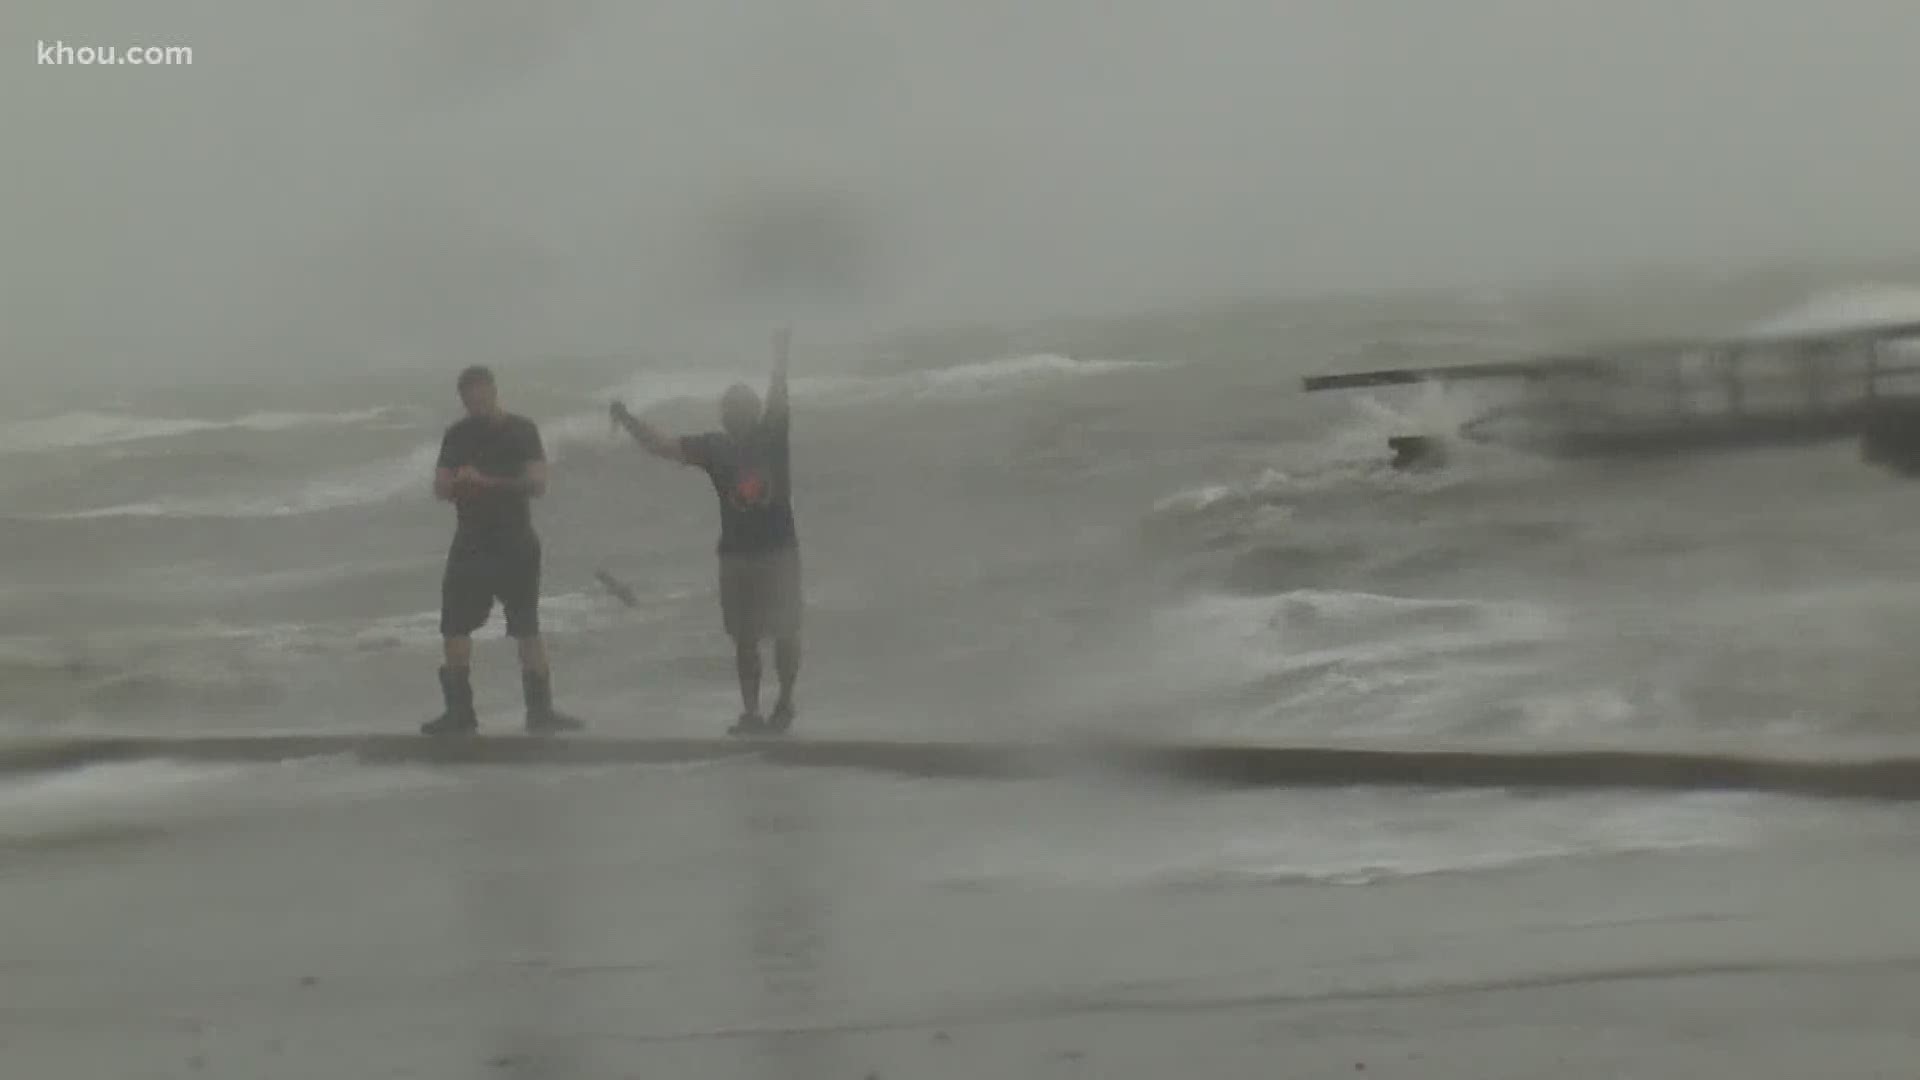 The storm blew in as a strong Category 1 hurricane. It made landfall in Padre Island at around 5 p.m.